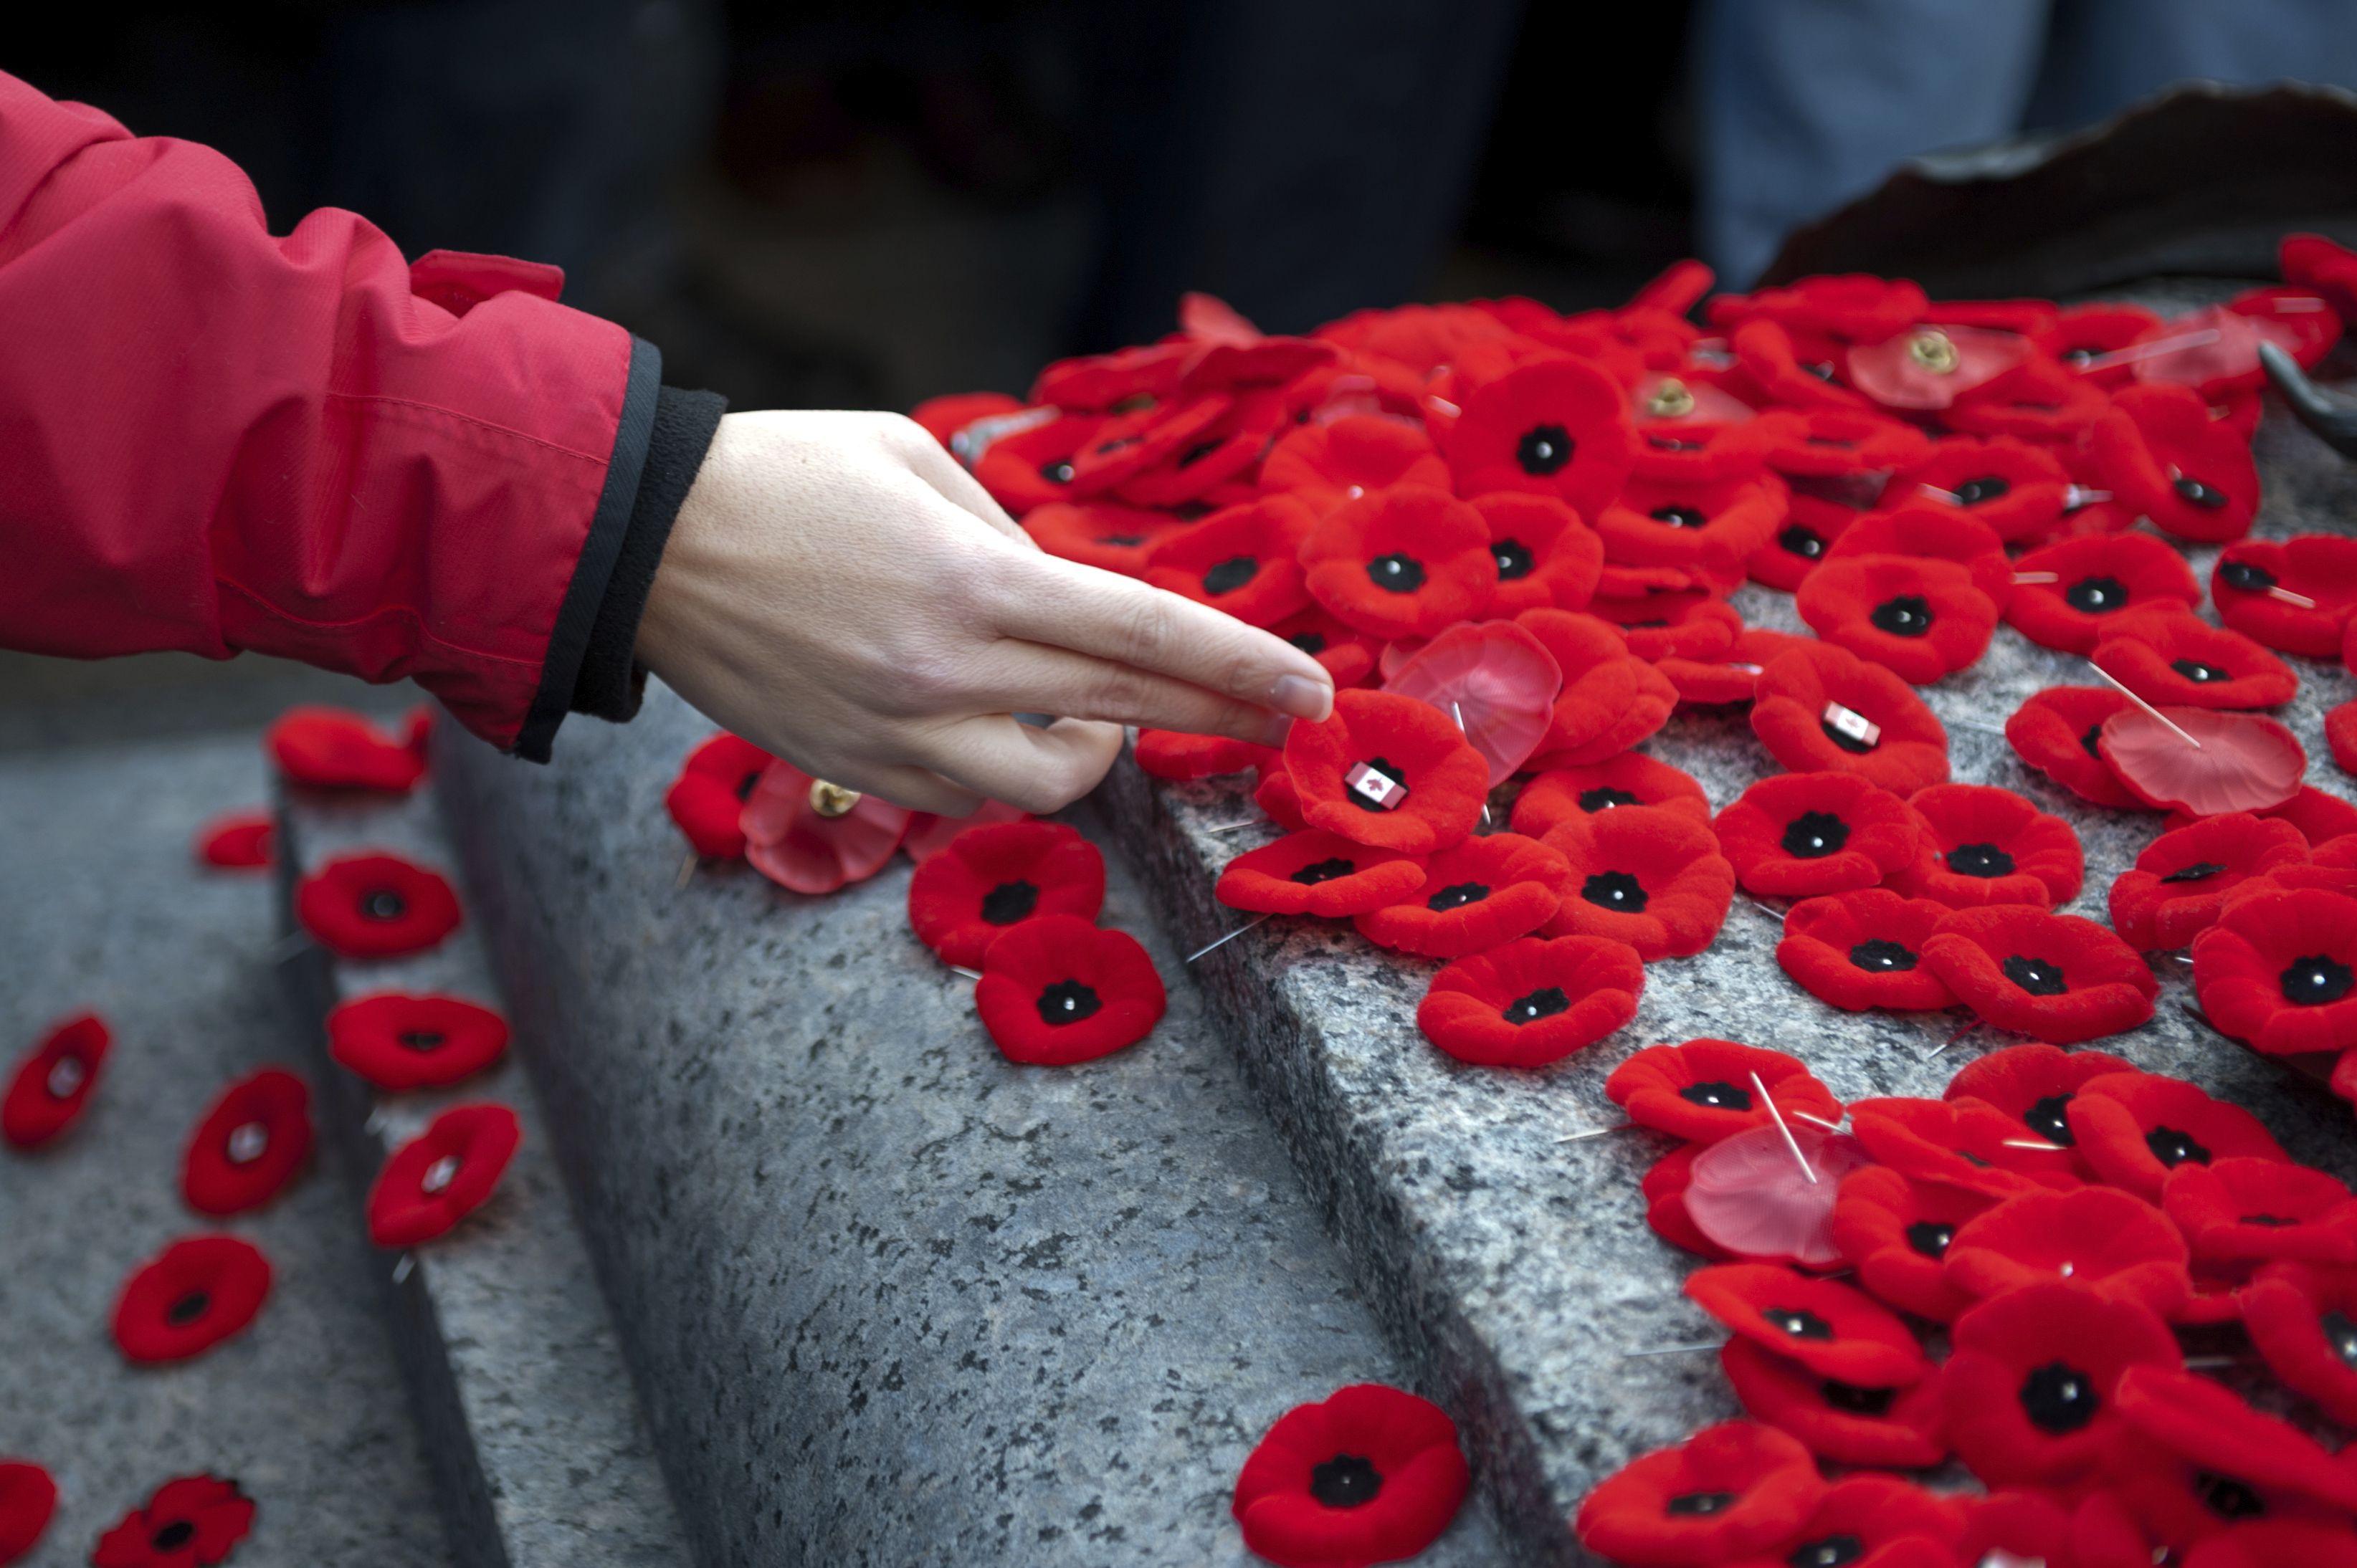 It's Time To Re Read John McCrae's Beautiful Poem. We Will